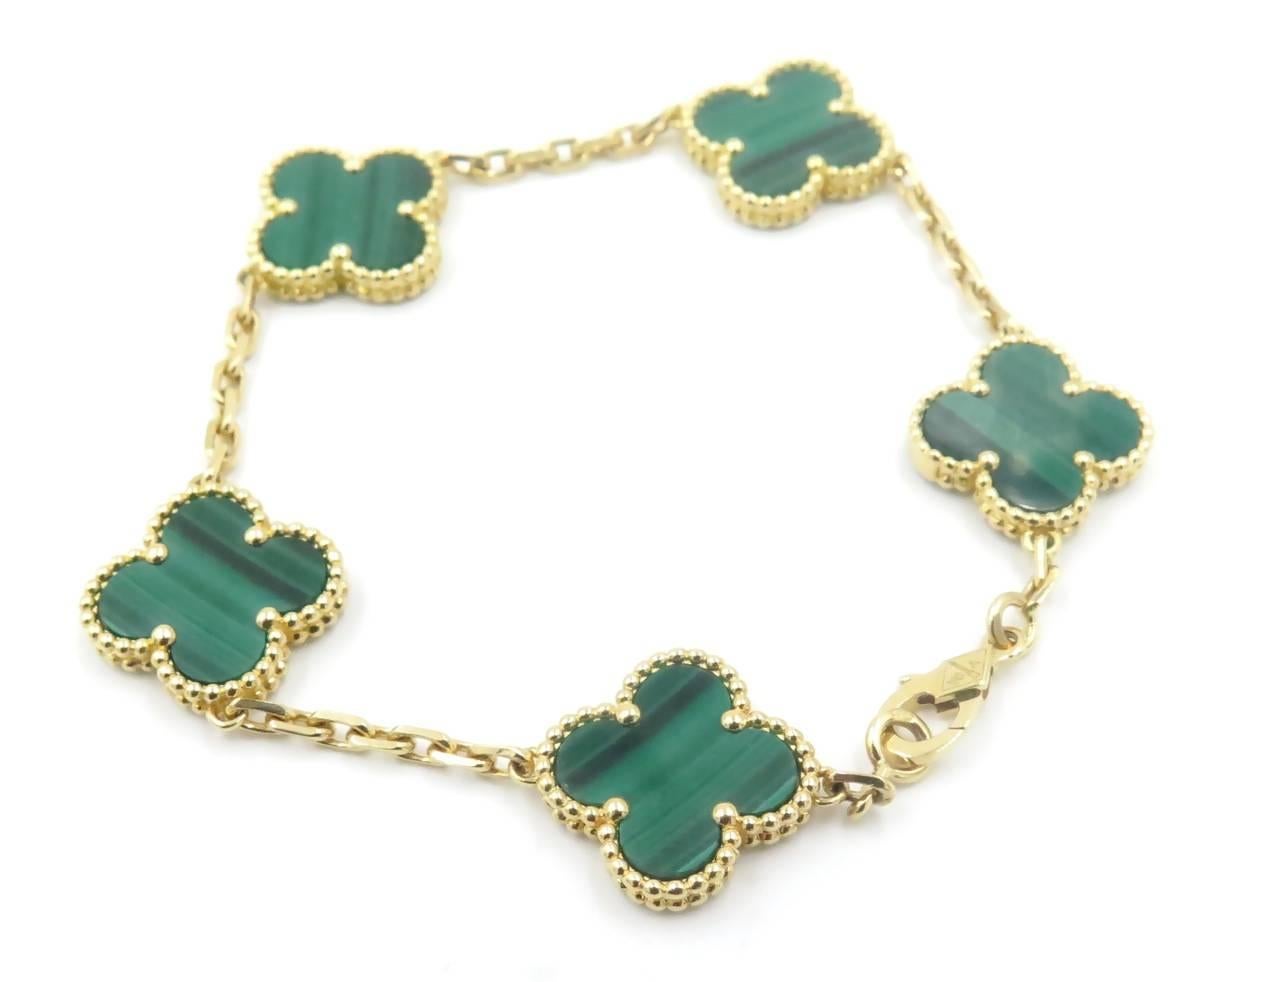 An 18 karat yellow gold and malachite Alhambra bracelet, 5 motifs.  Stamped VCA AU750, numbered JE440243, with makers mark.  Length is 6 1/2 inches.  10.0 grams.